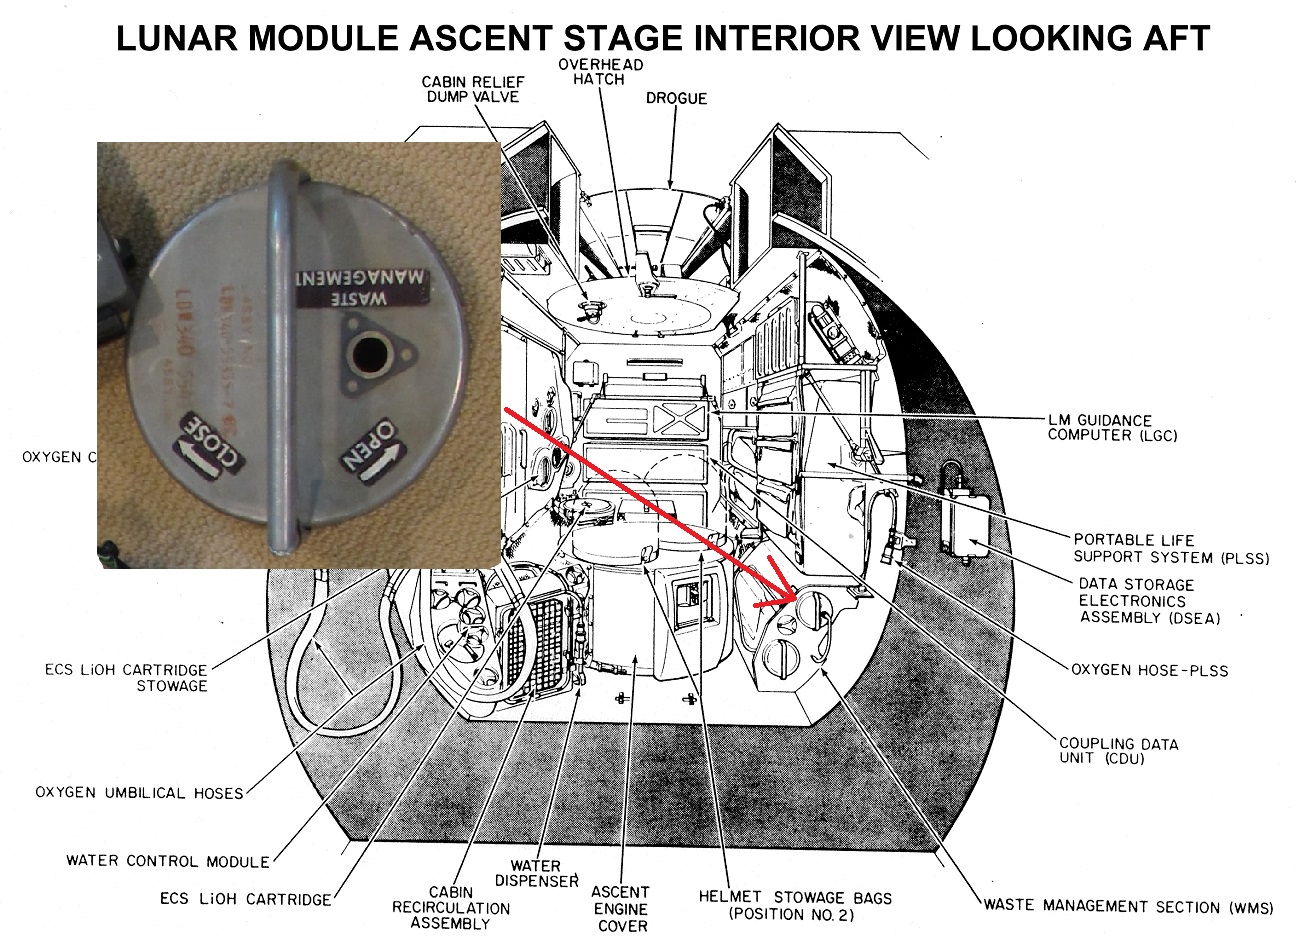 LM-5 Interior Aft view Waste Management Cover